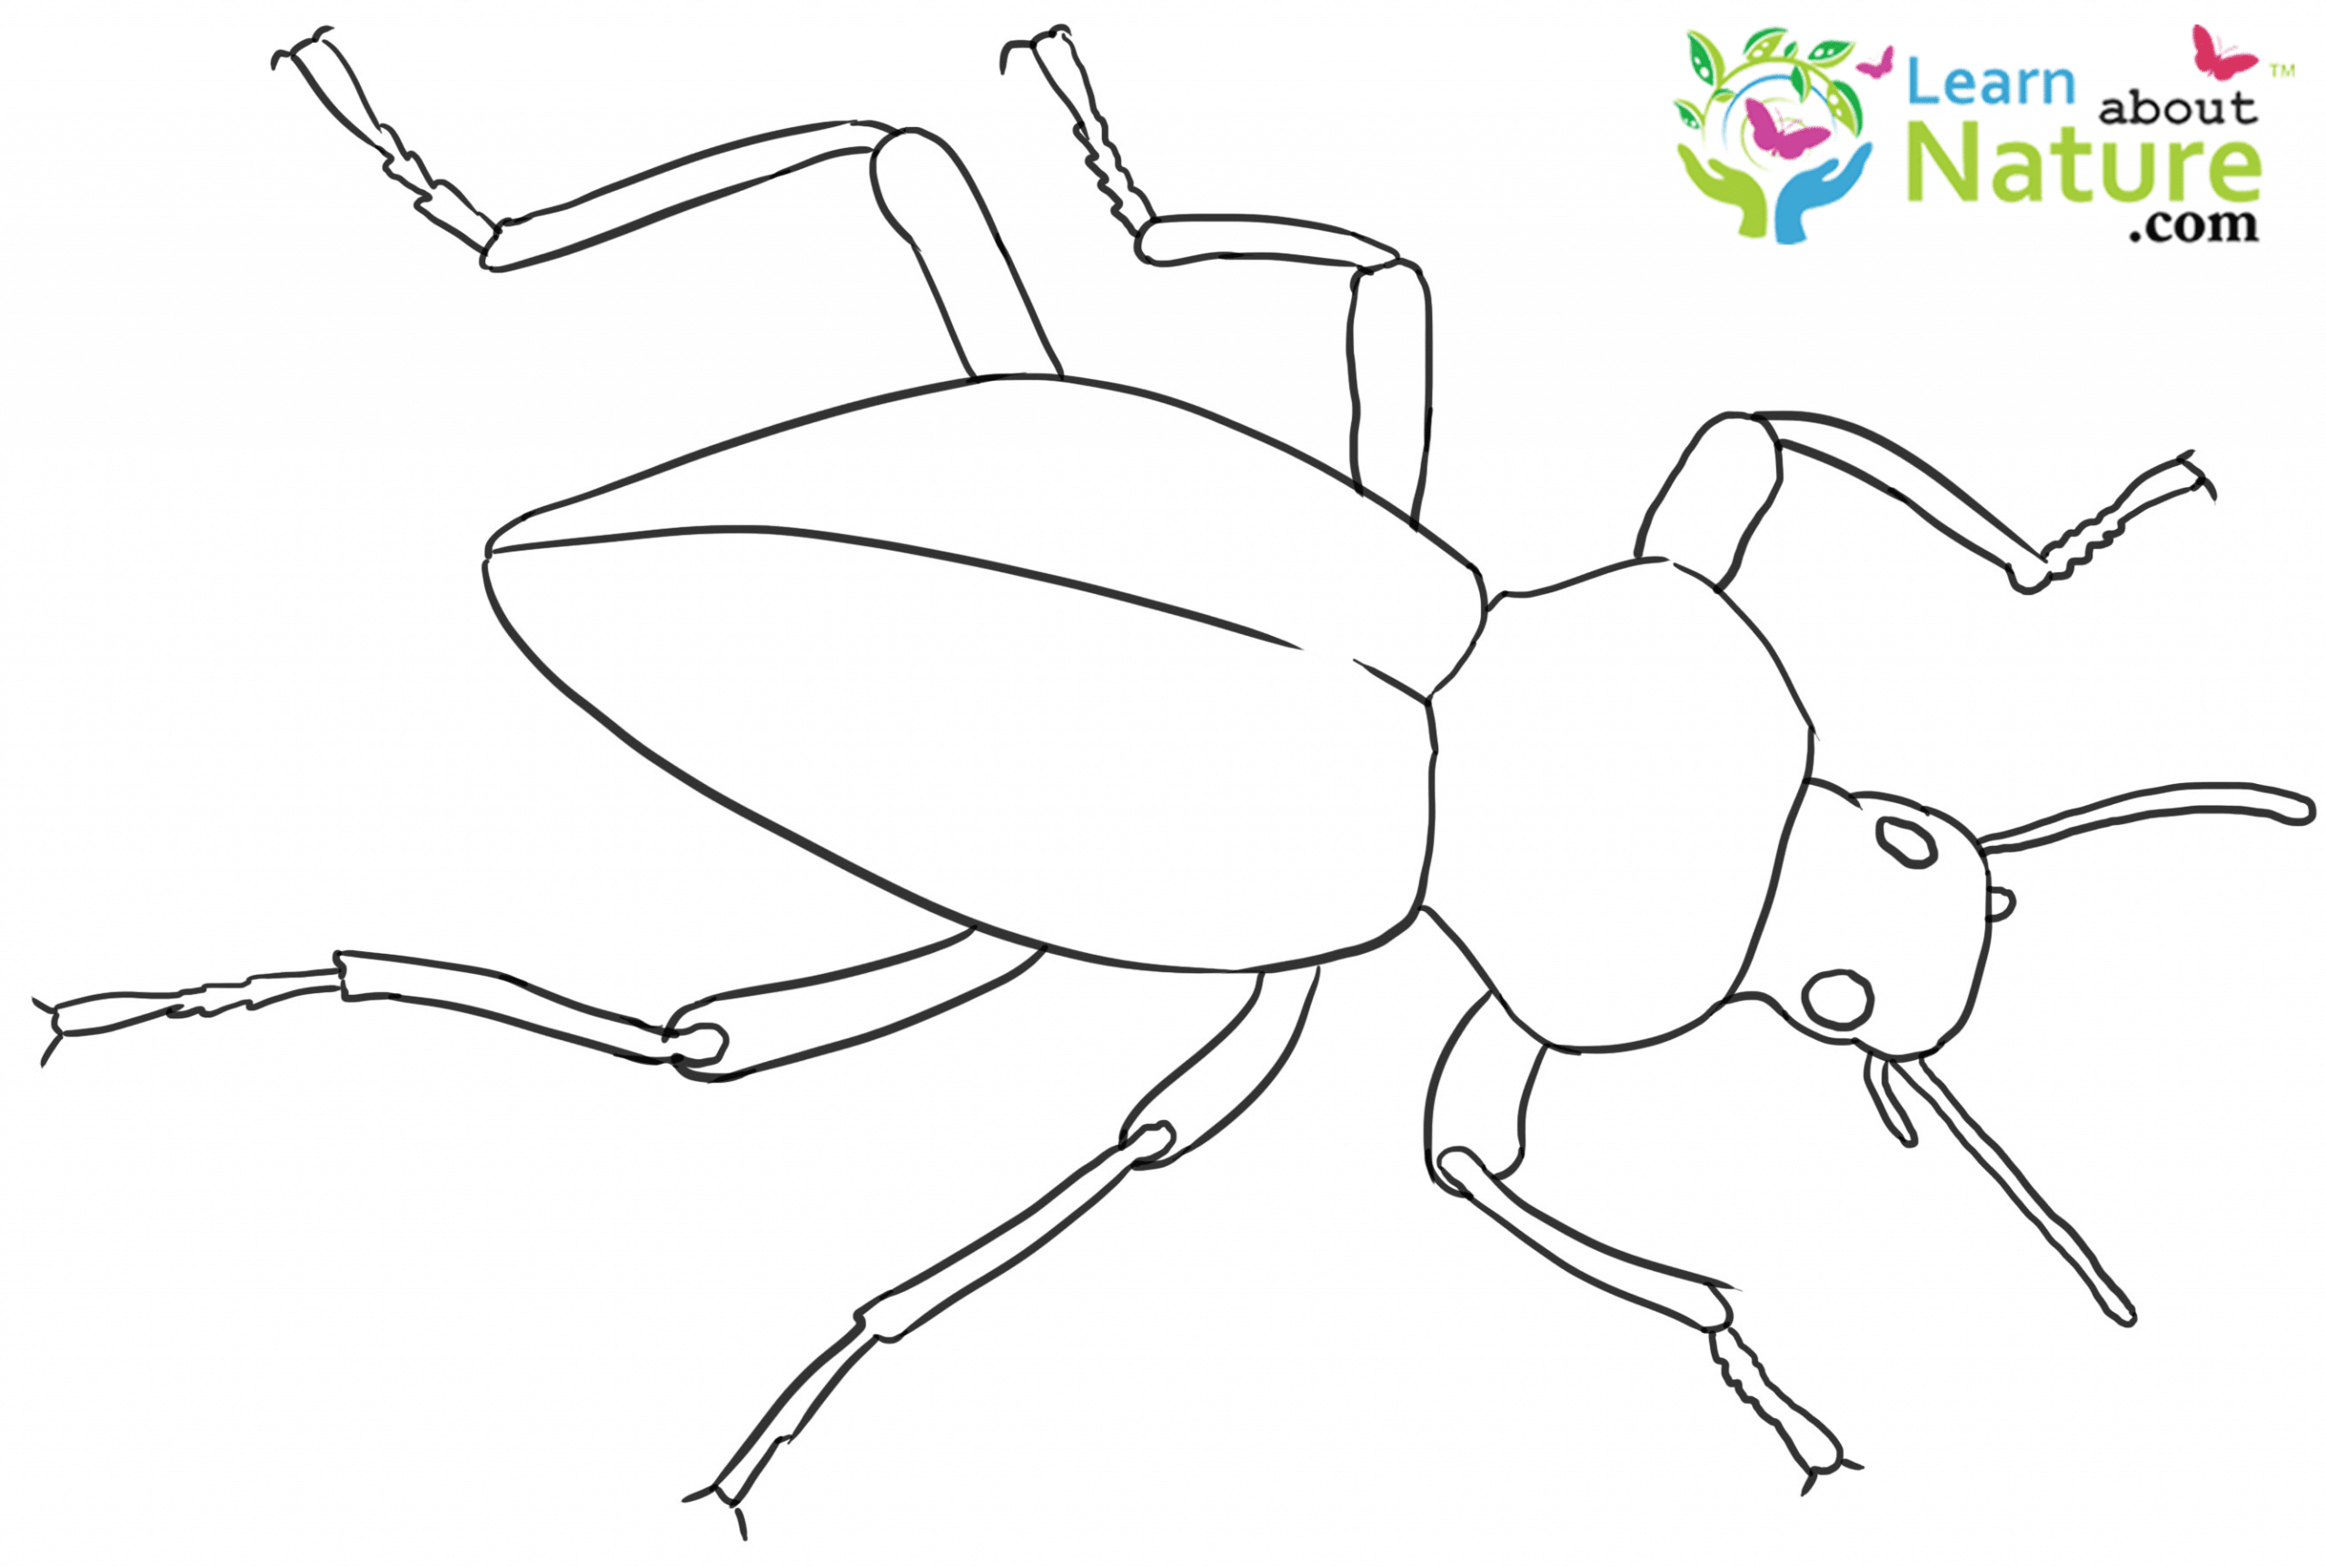 beetle-coloring-pages-to-print-free-coloring-sheets-coloring-pages-to-print-bug-coloring